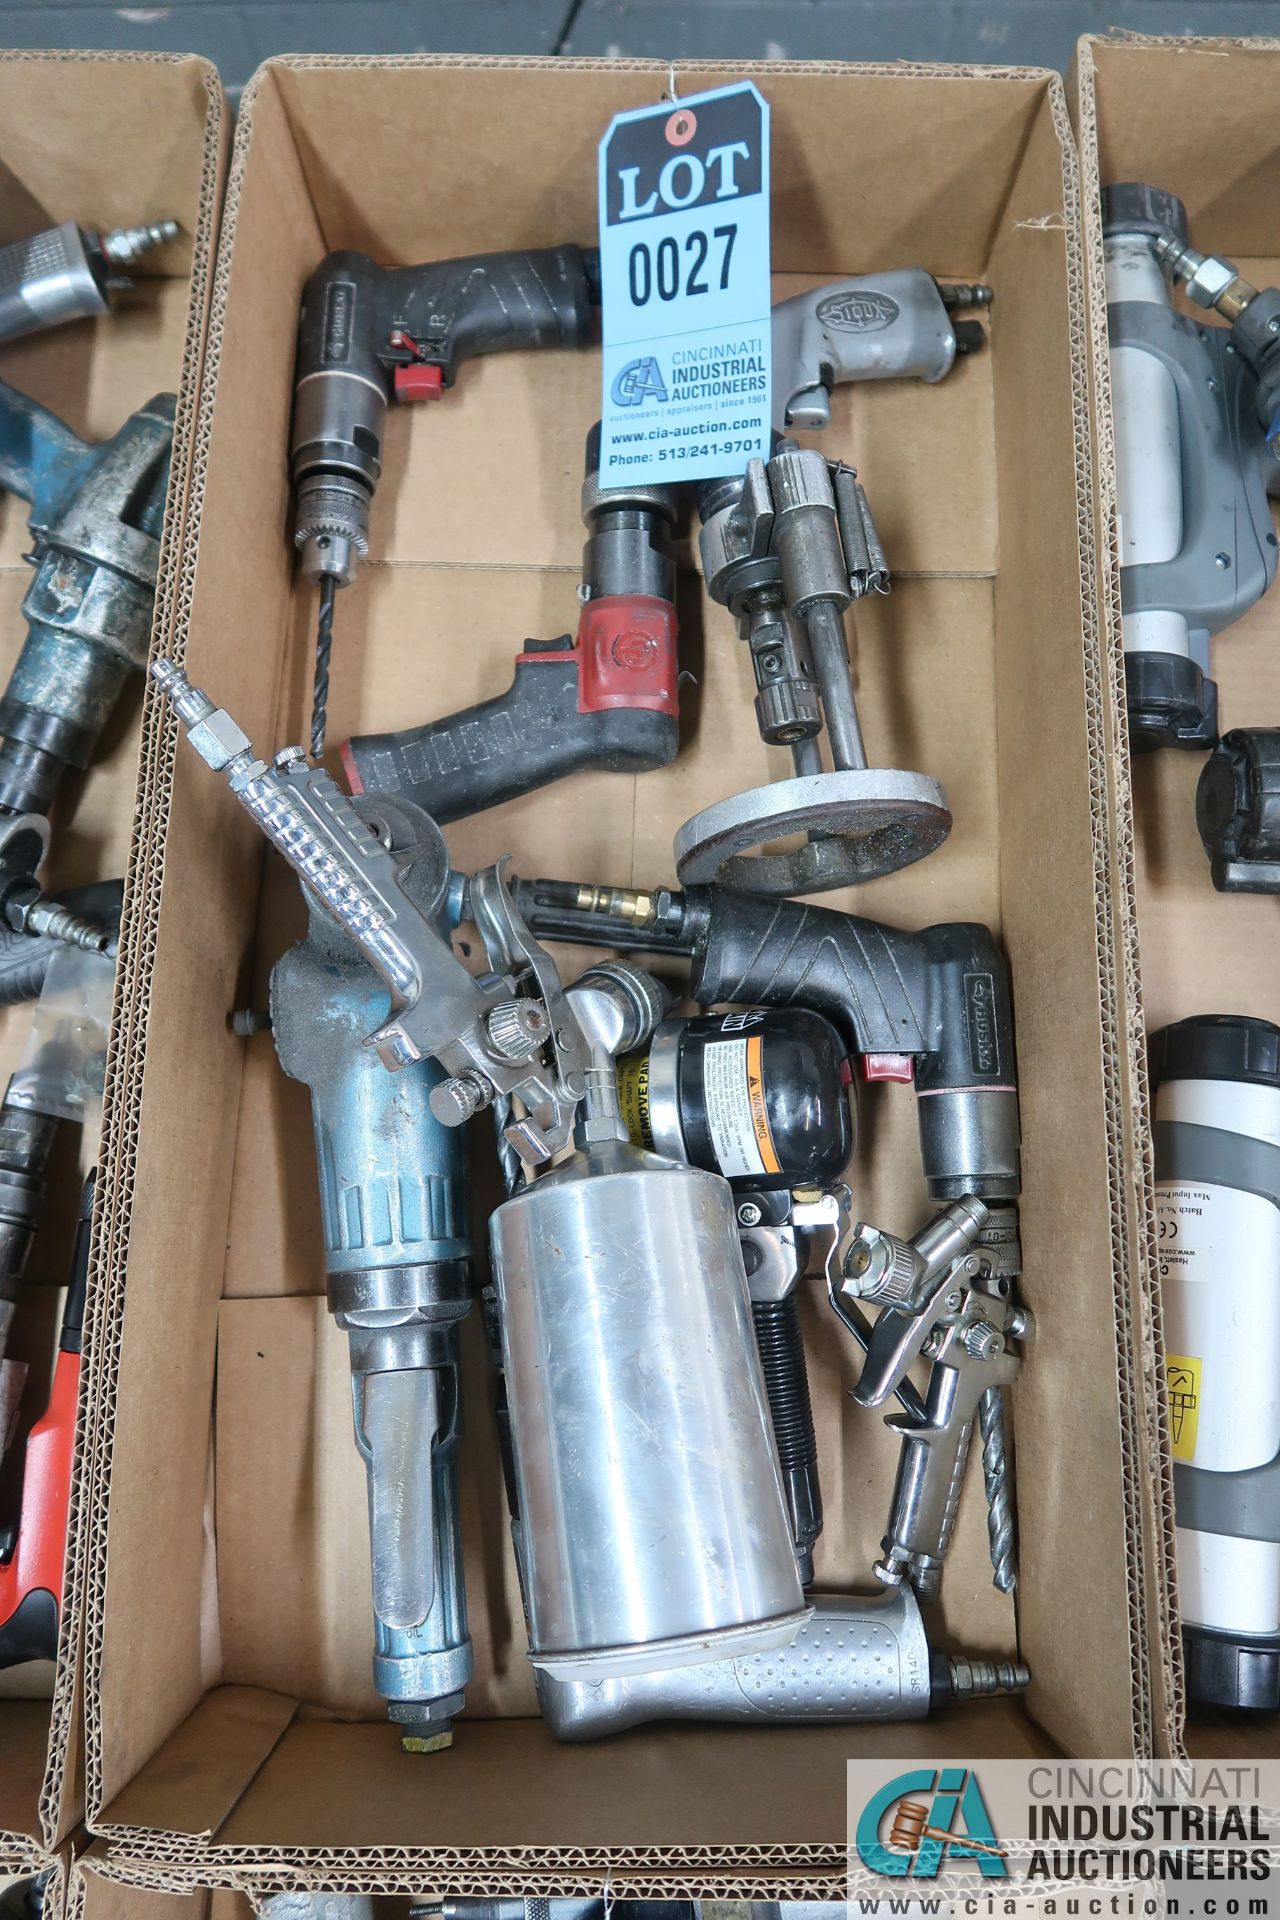 (LOT) ASSORTED PNEUMATIC HAND TOOLS - PARTS SPRAYERS, DRILLS, ANGLE GRINDER